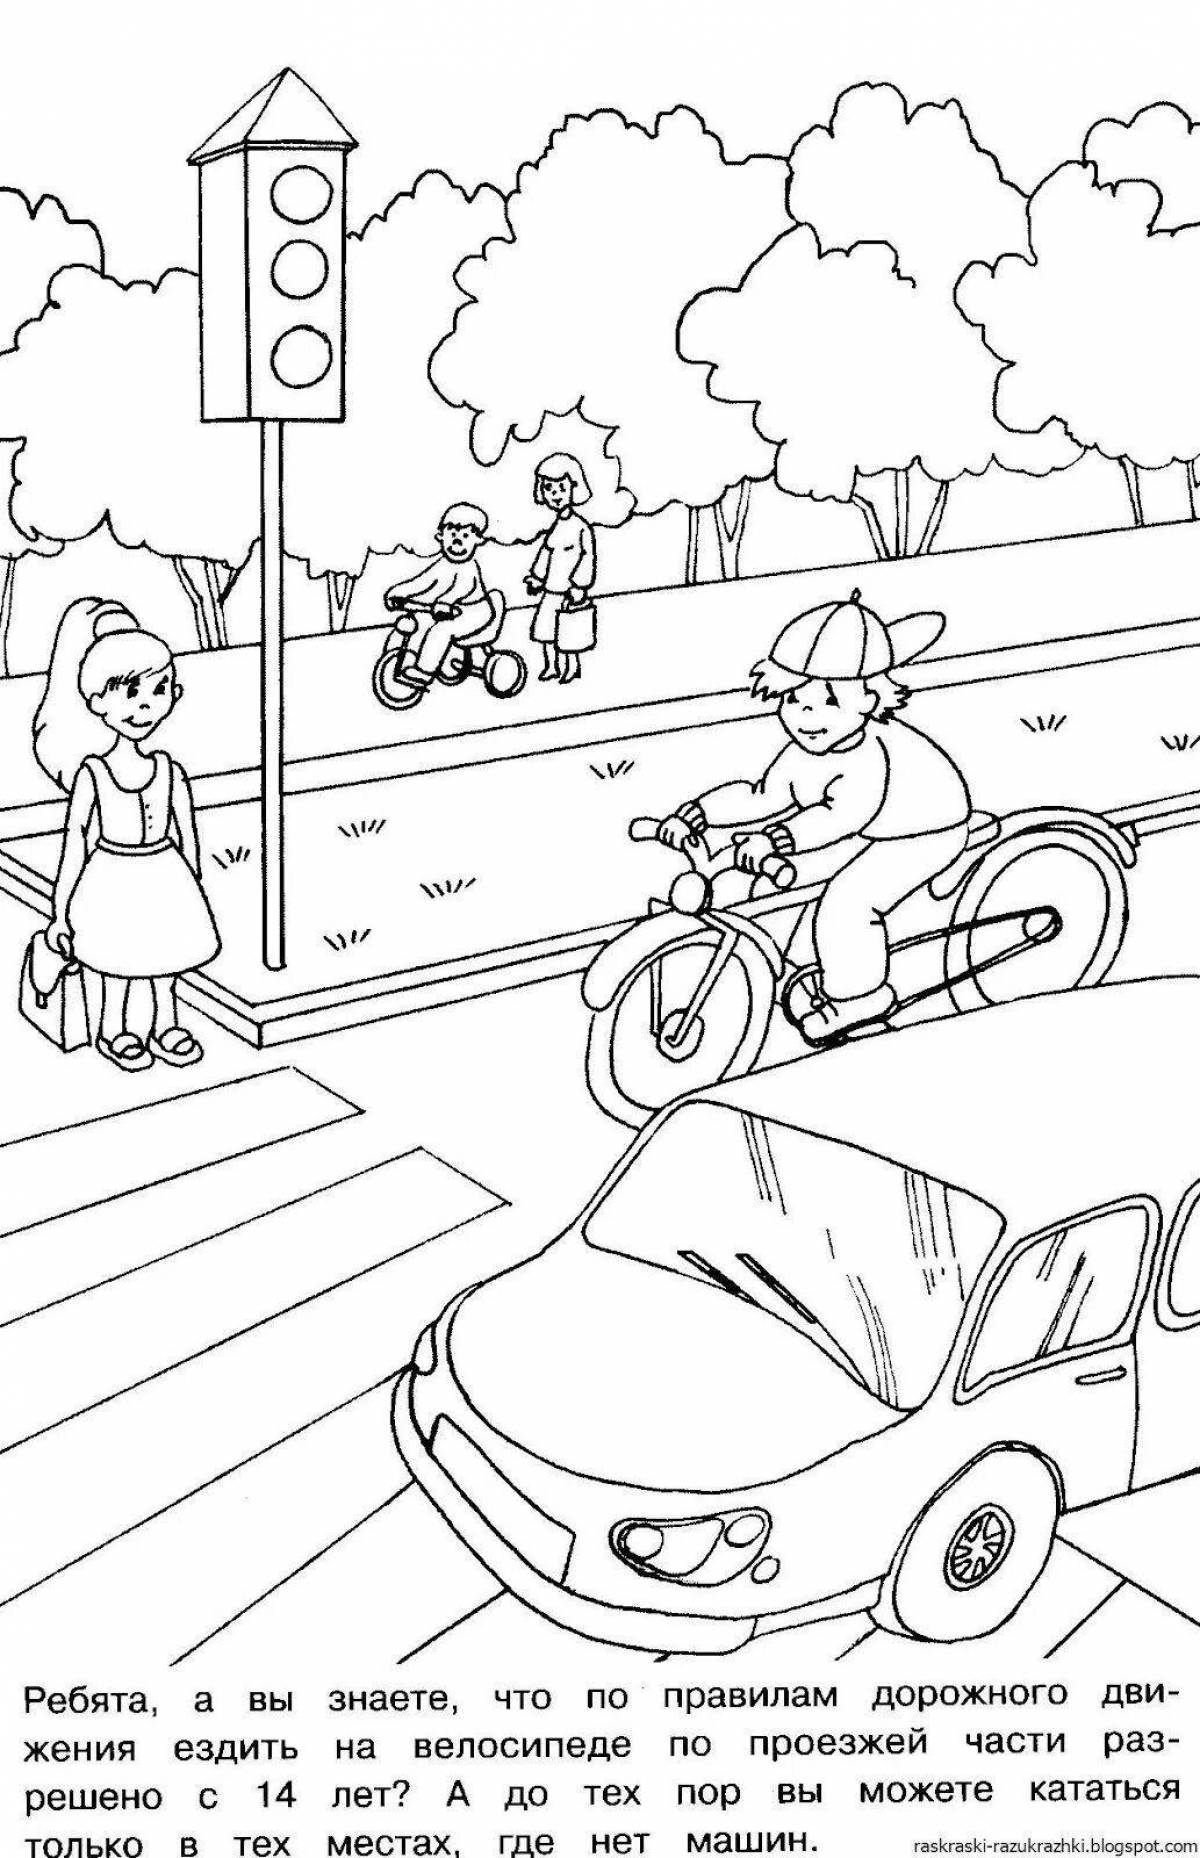 Charming careful! car coloring page